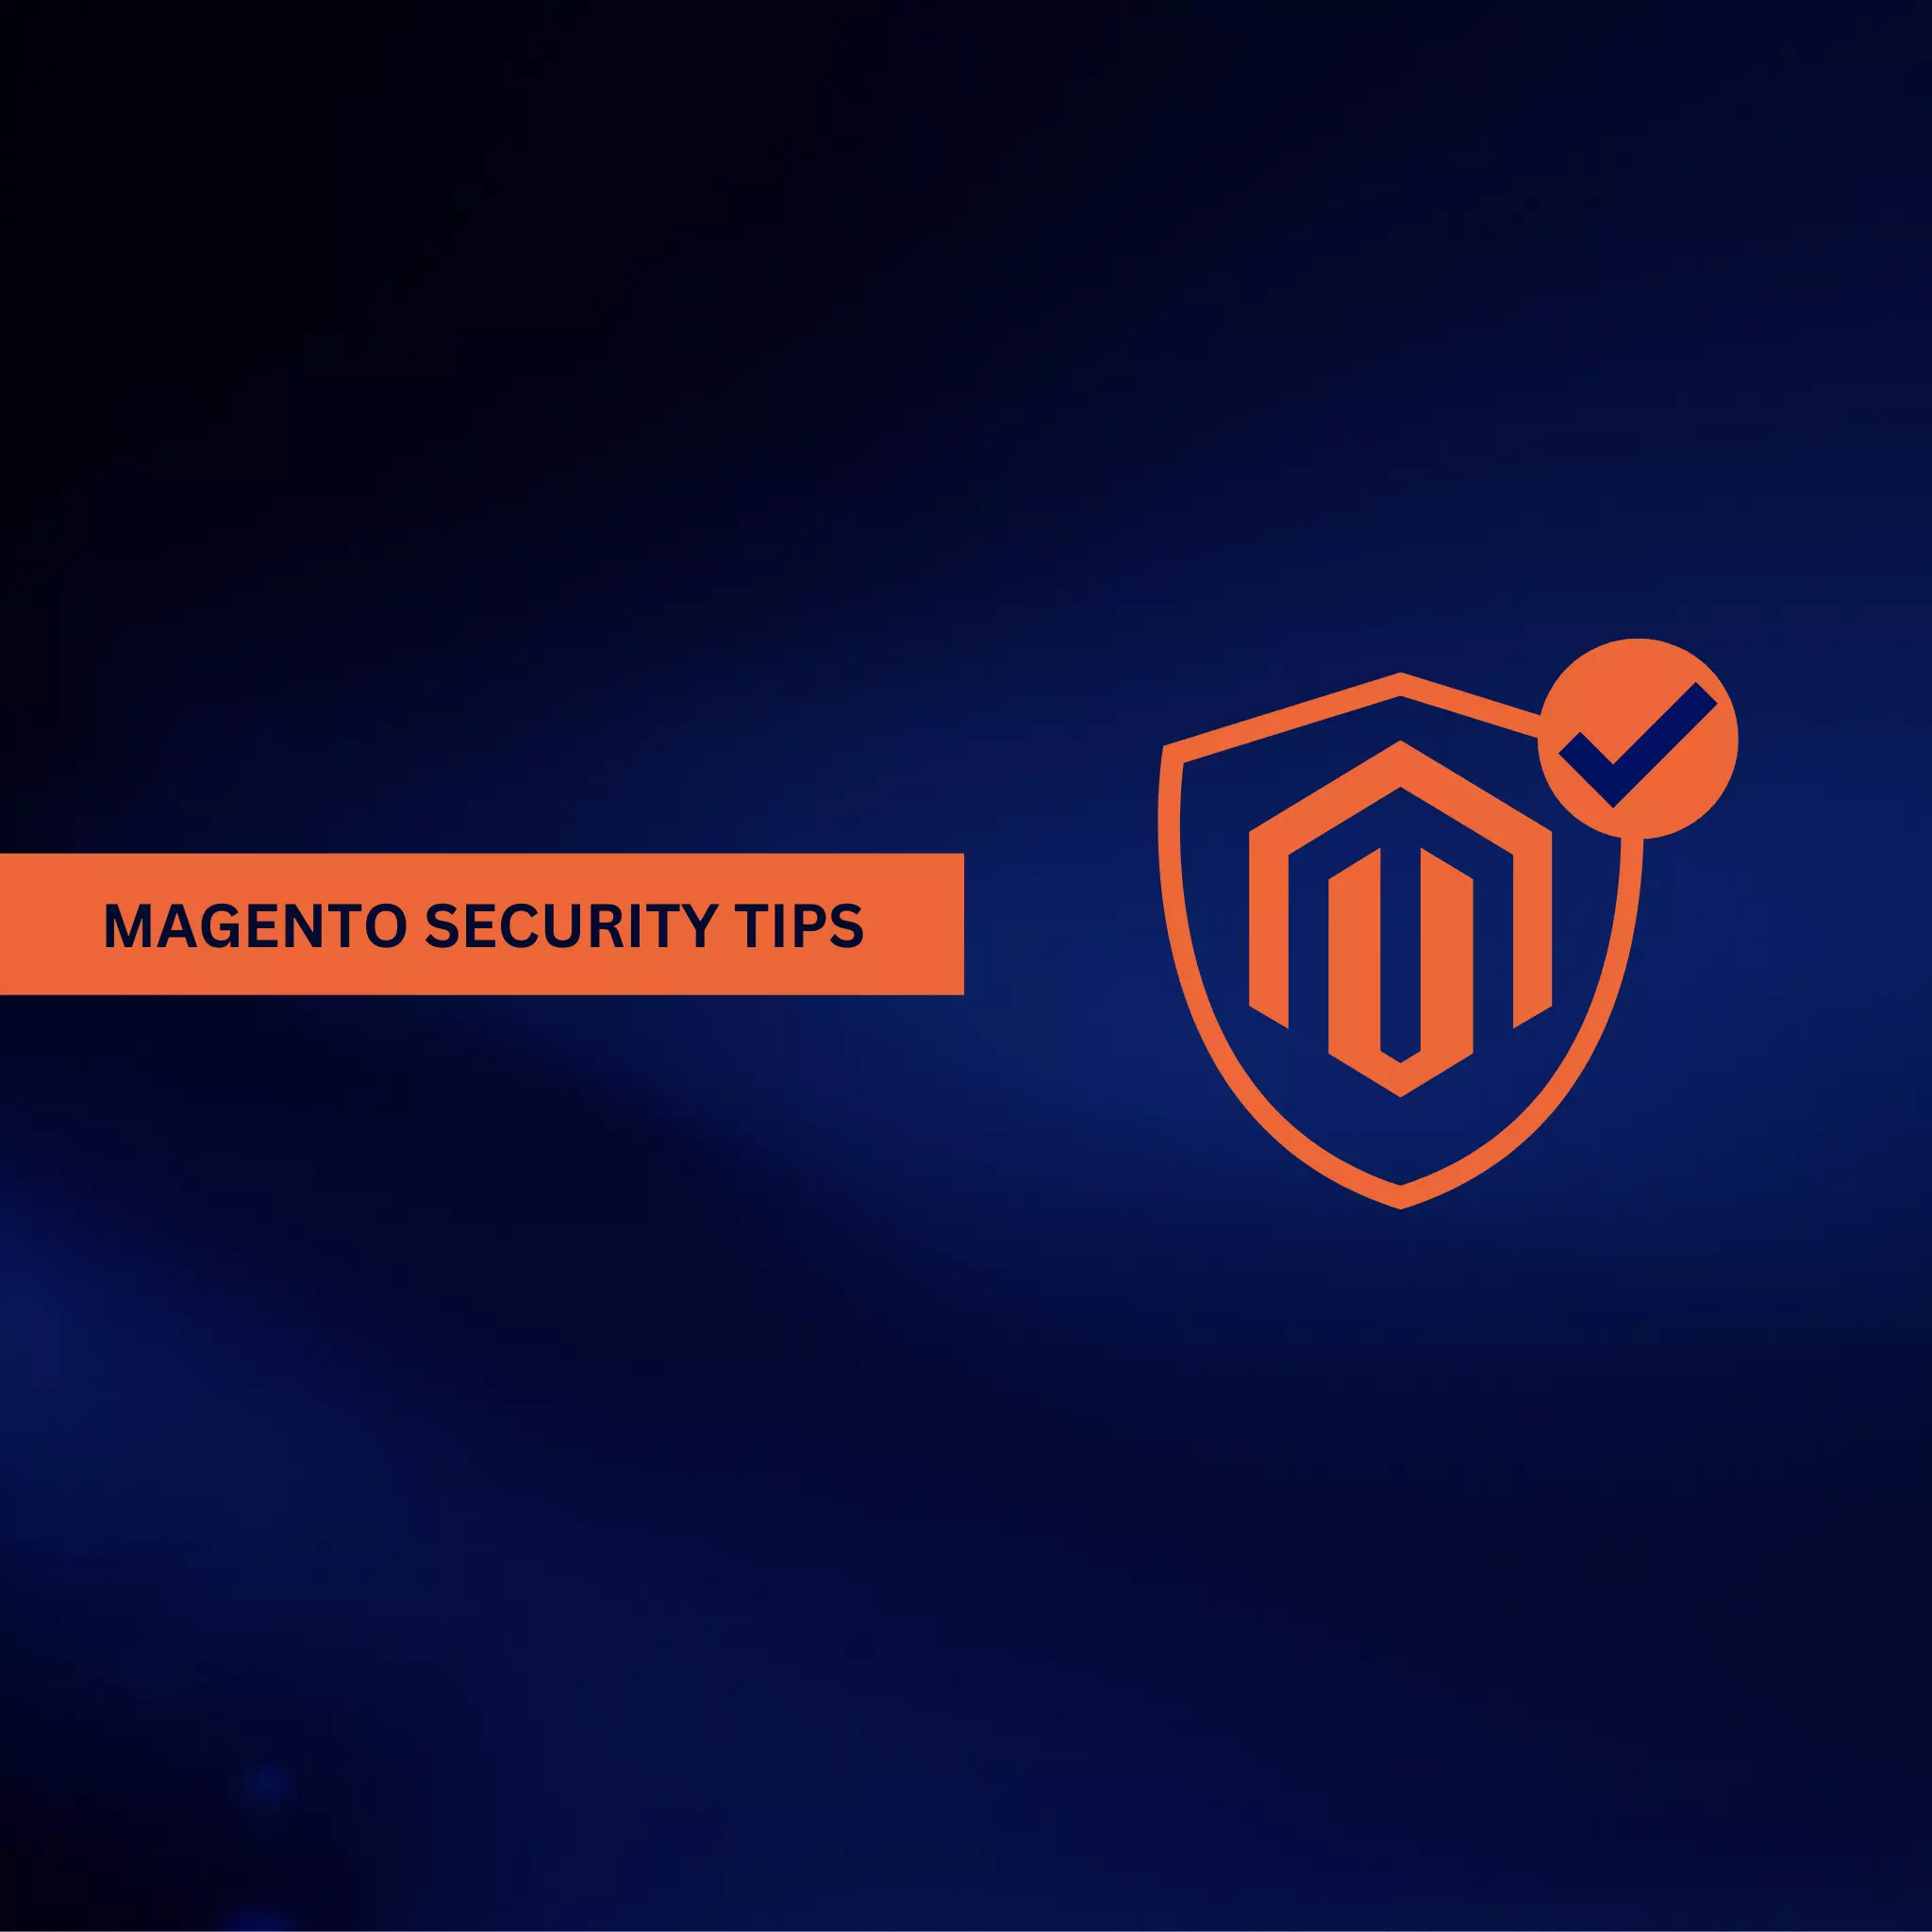 Expert tips for ensuring Magento security